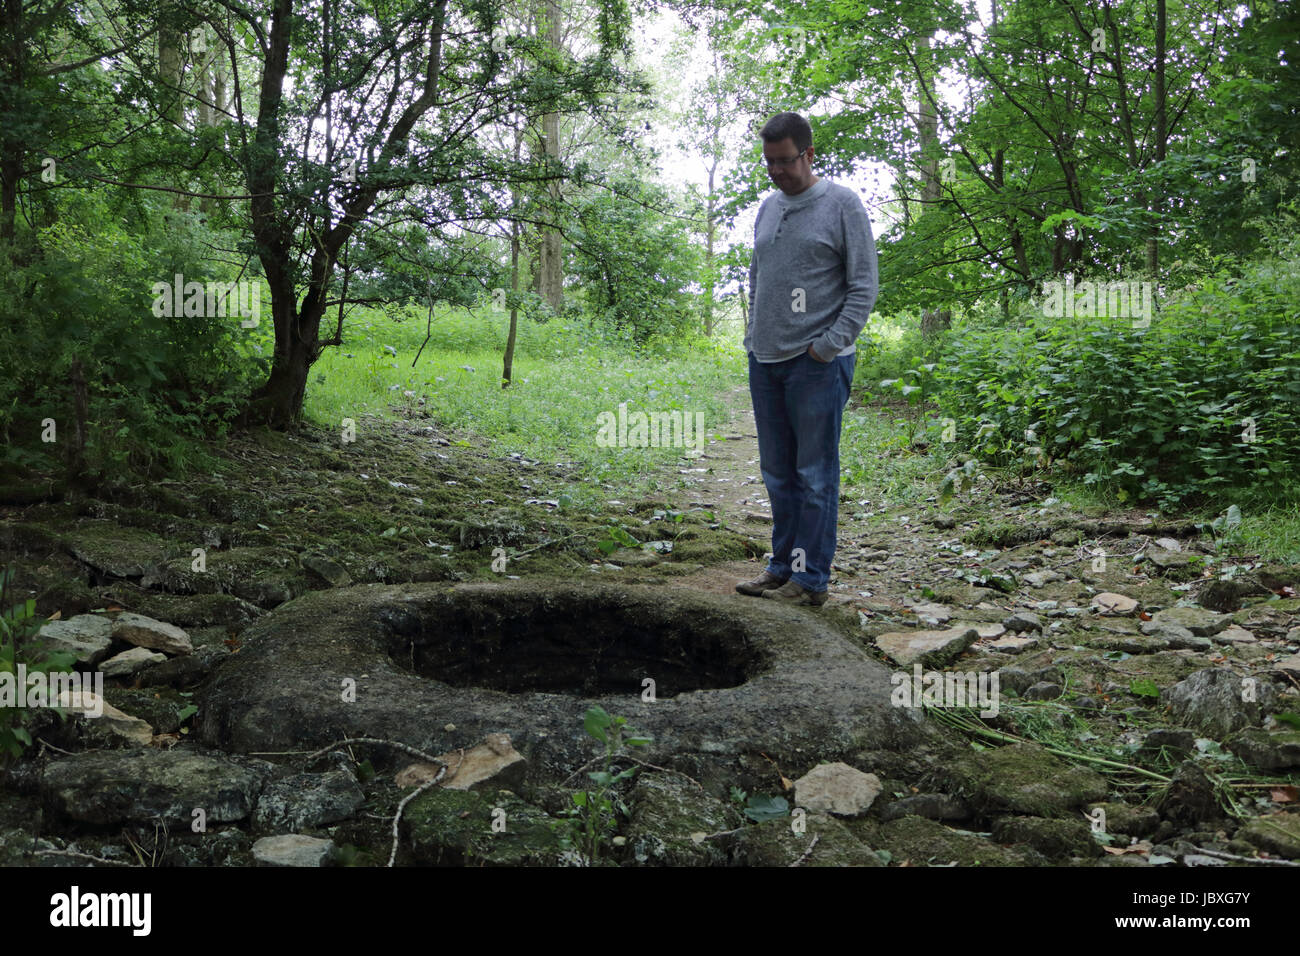 The  Lyd Well possible River Thames Source or Head near Kemble Gloucestershire UK Stock Photo